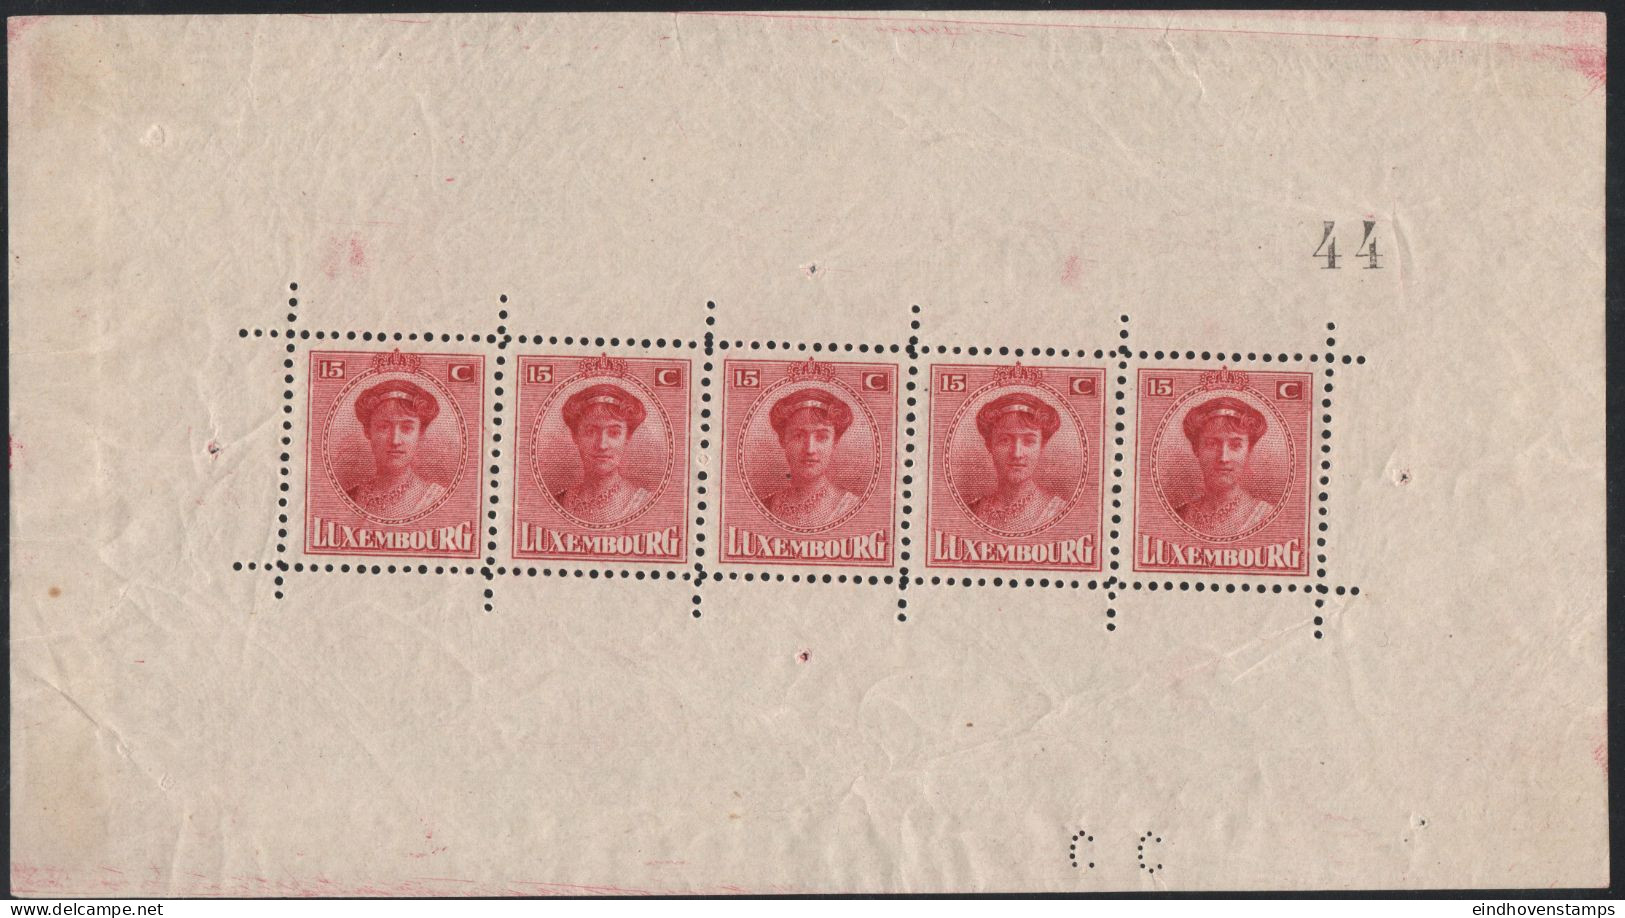 Luxemburg 1921 Minisheet Of 5 Stamps Charlotte MNH Left Side Ungommed, Some Usual Wrinkles Outside The Stamps - 1921-27 Charlotte De Face